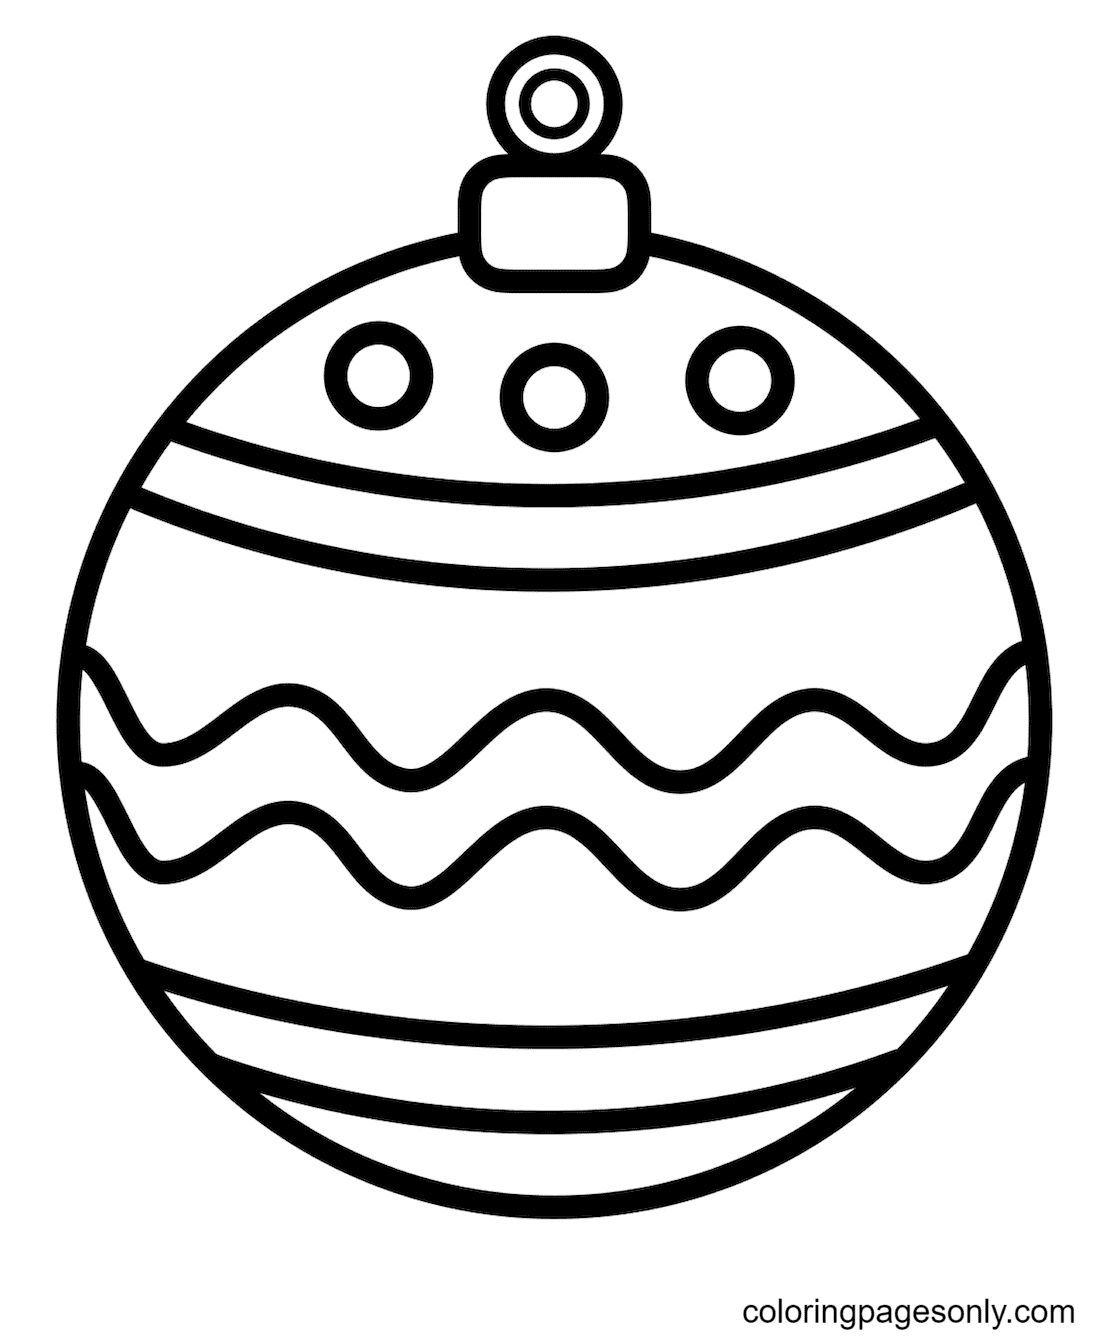 Christmas ornaments coloring pages printable for free download